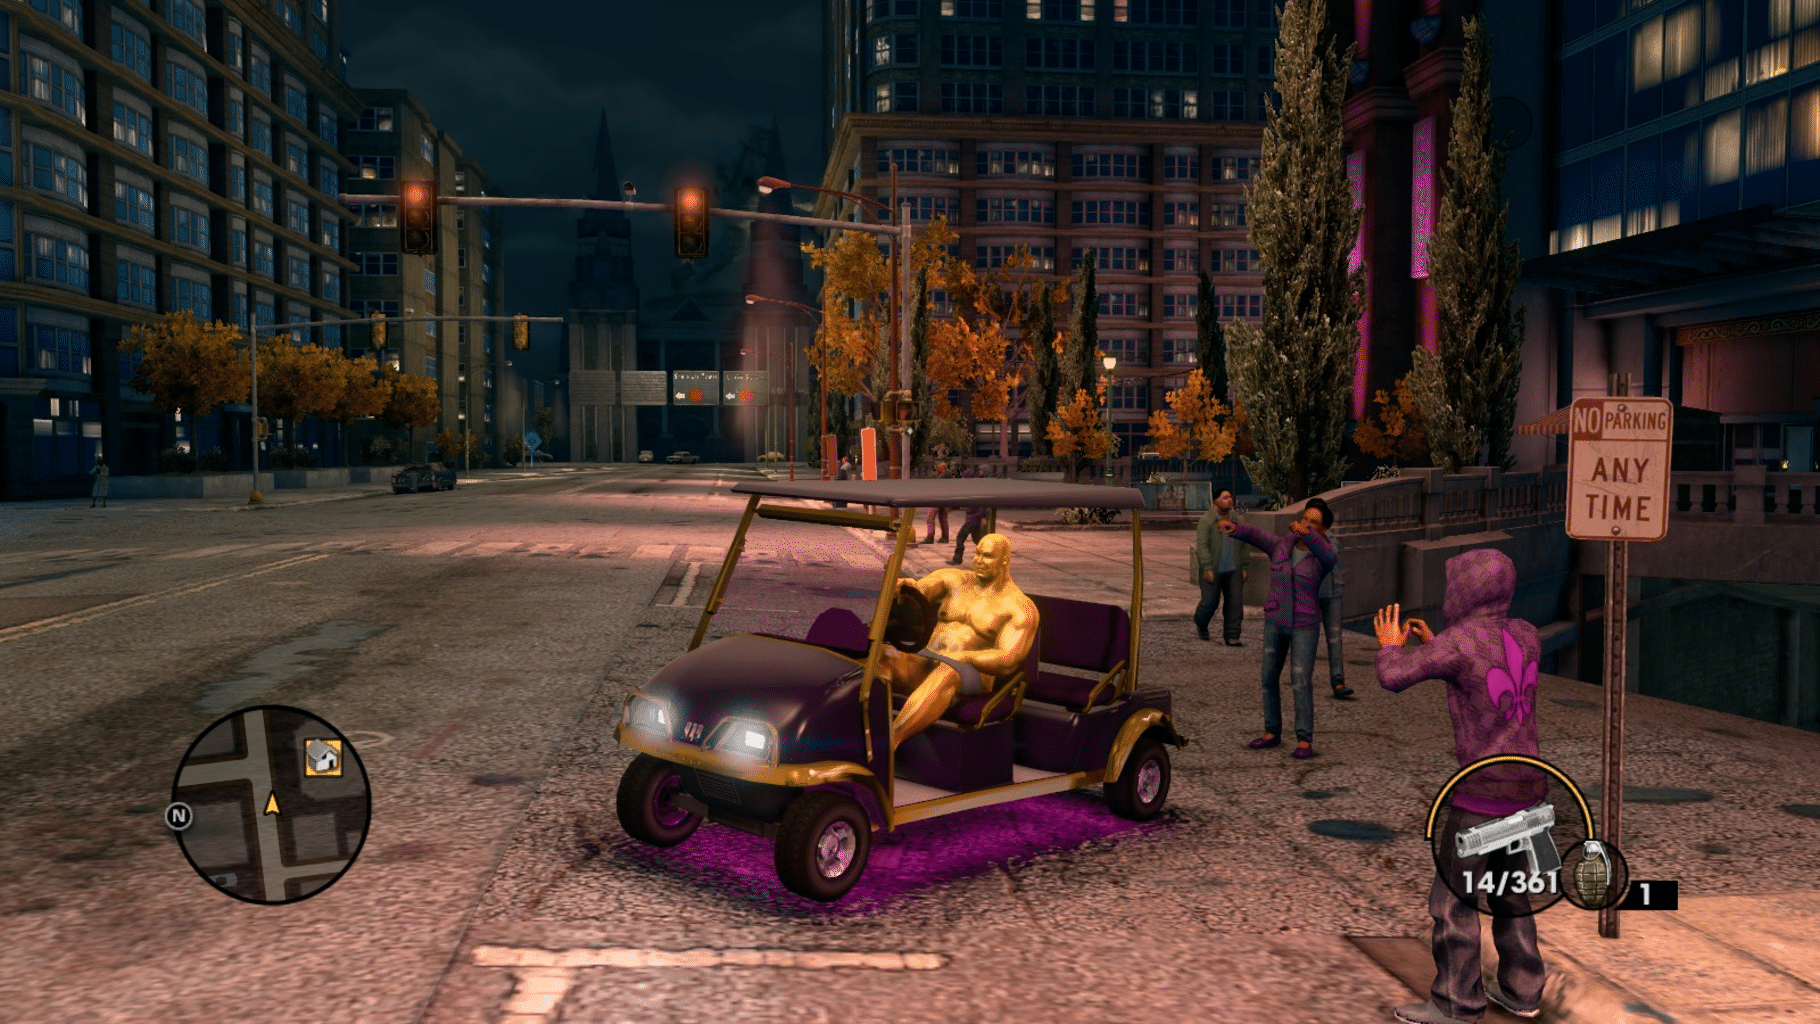 download saints row the fourth for free